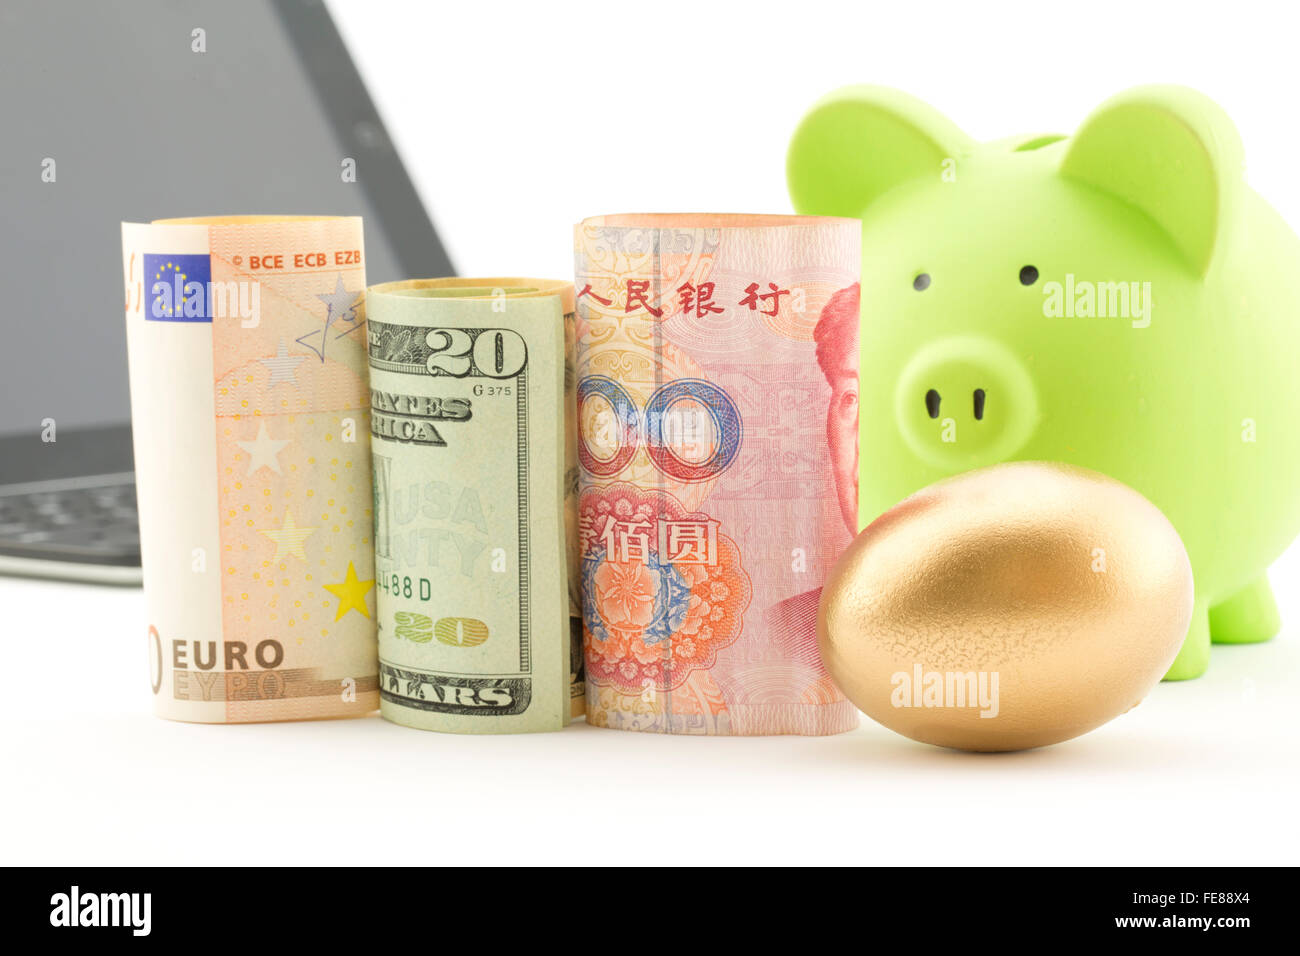 Three currencies, euro, dollar, and yen, placed with gold nest egg with computer and bank in background. Stock Photo